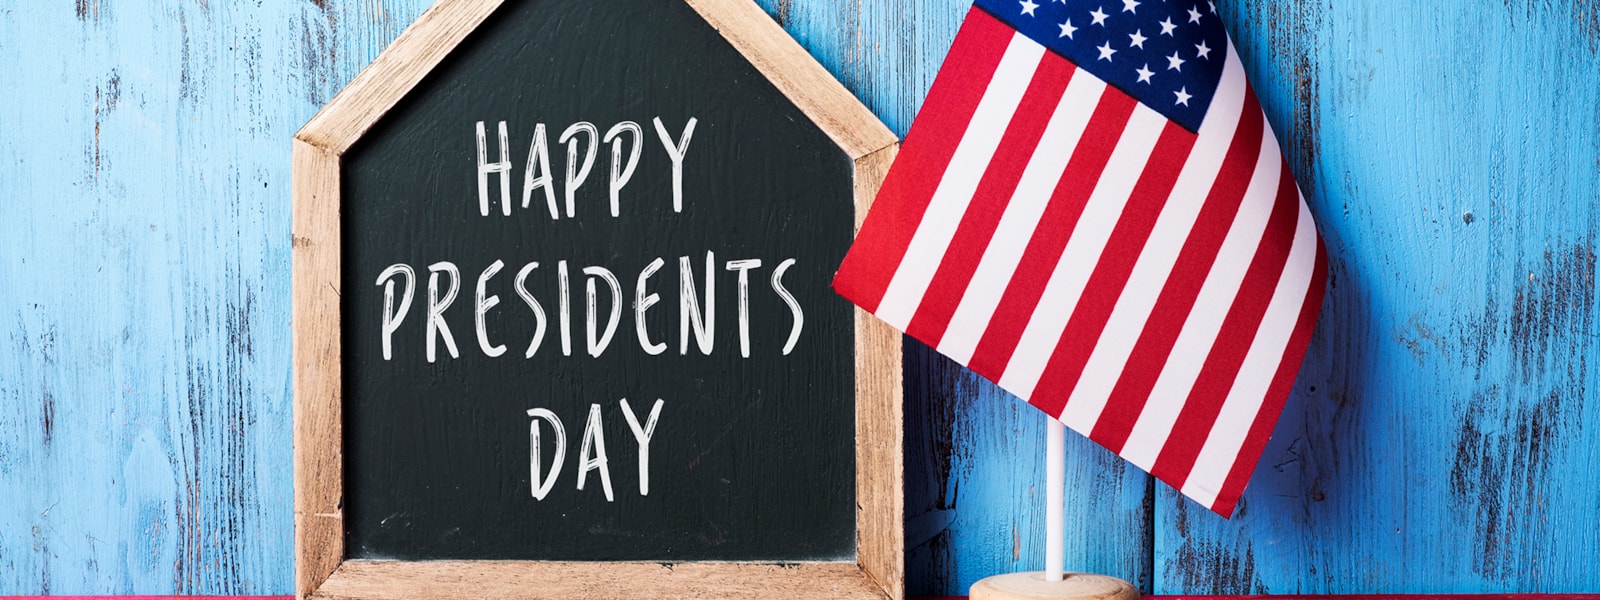 Happy Presidents Day sign and flag